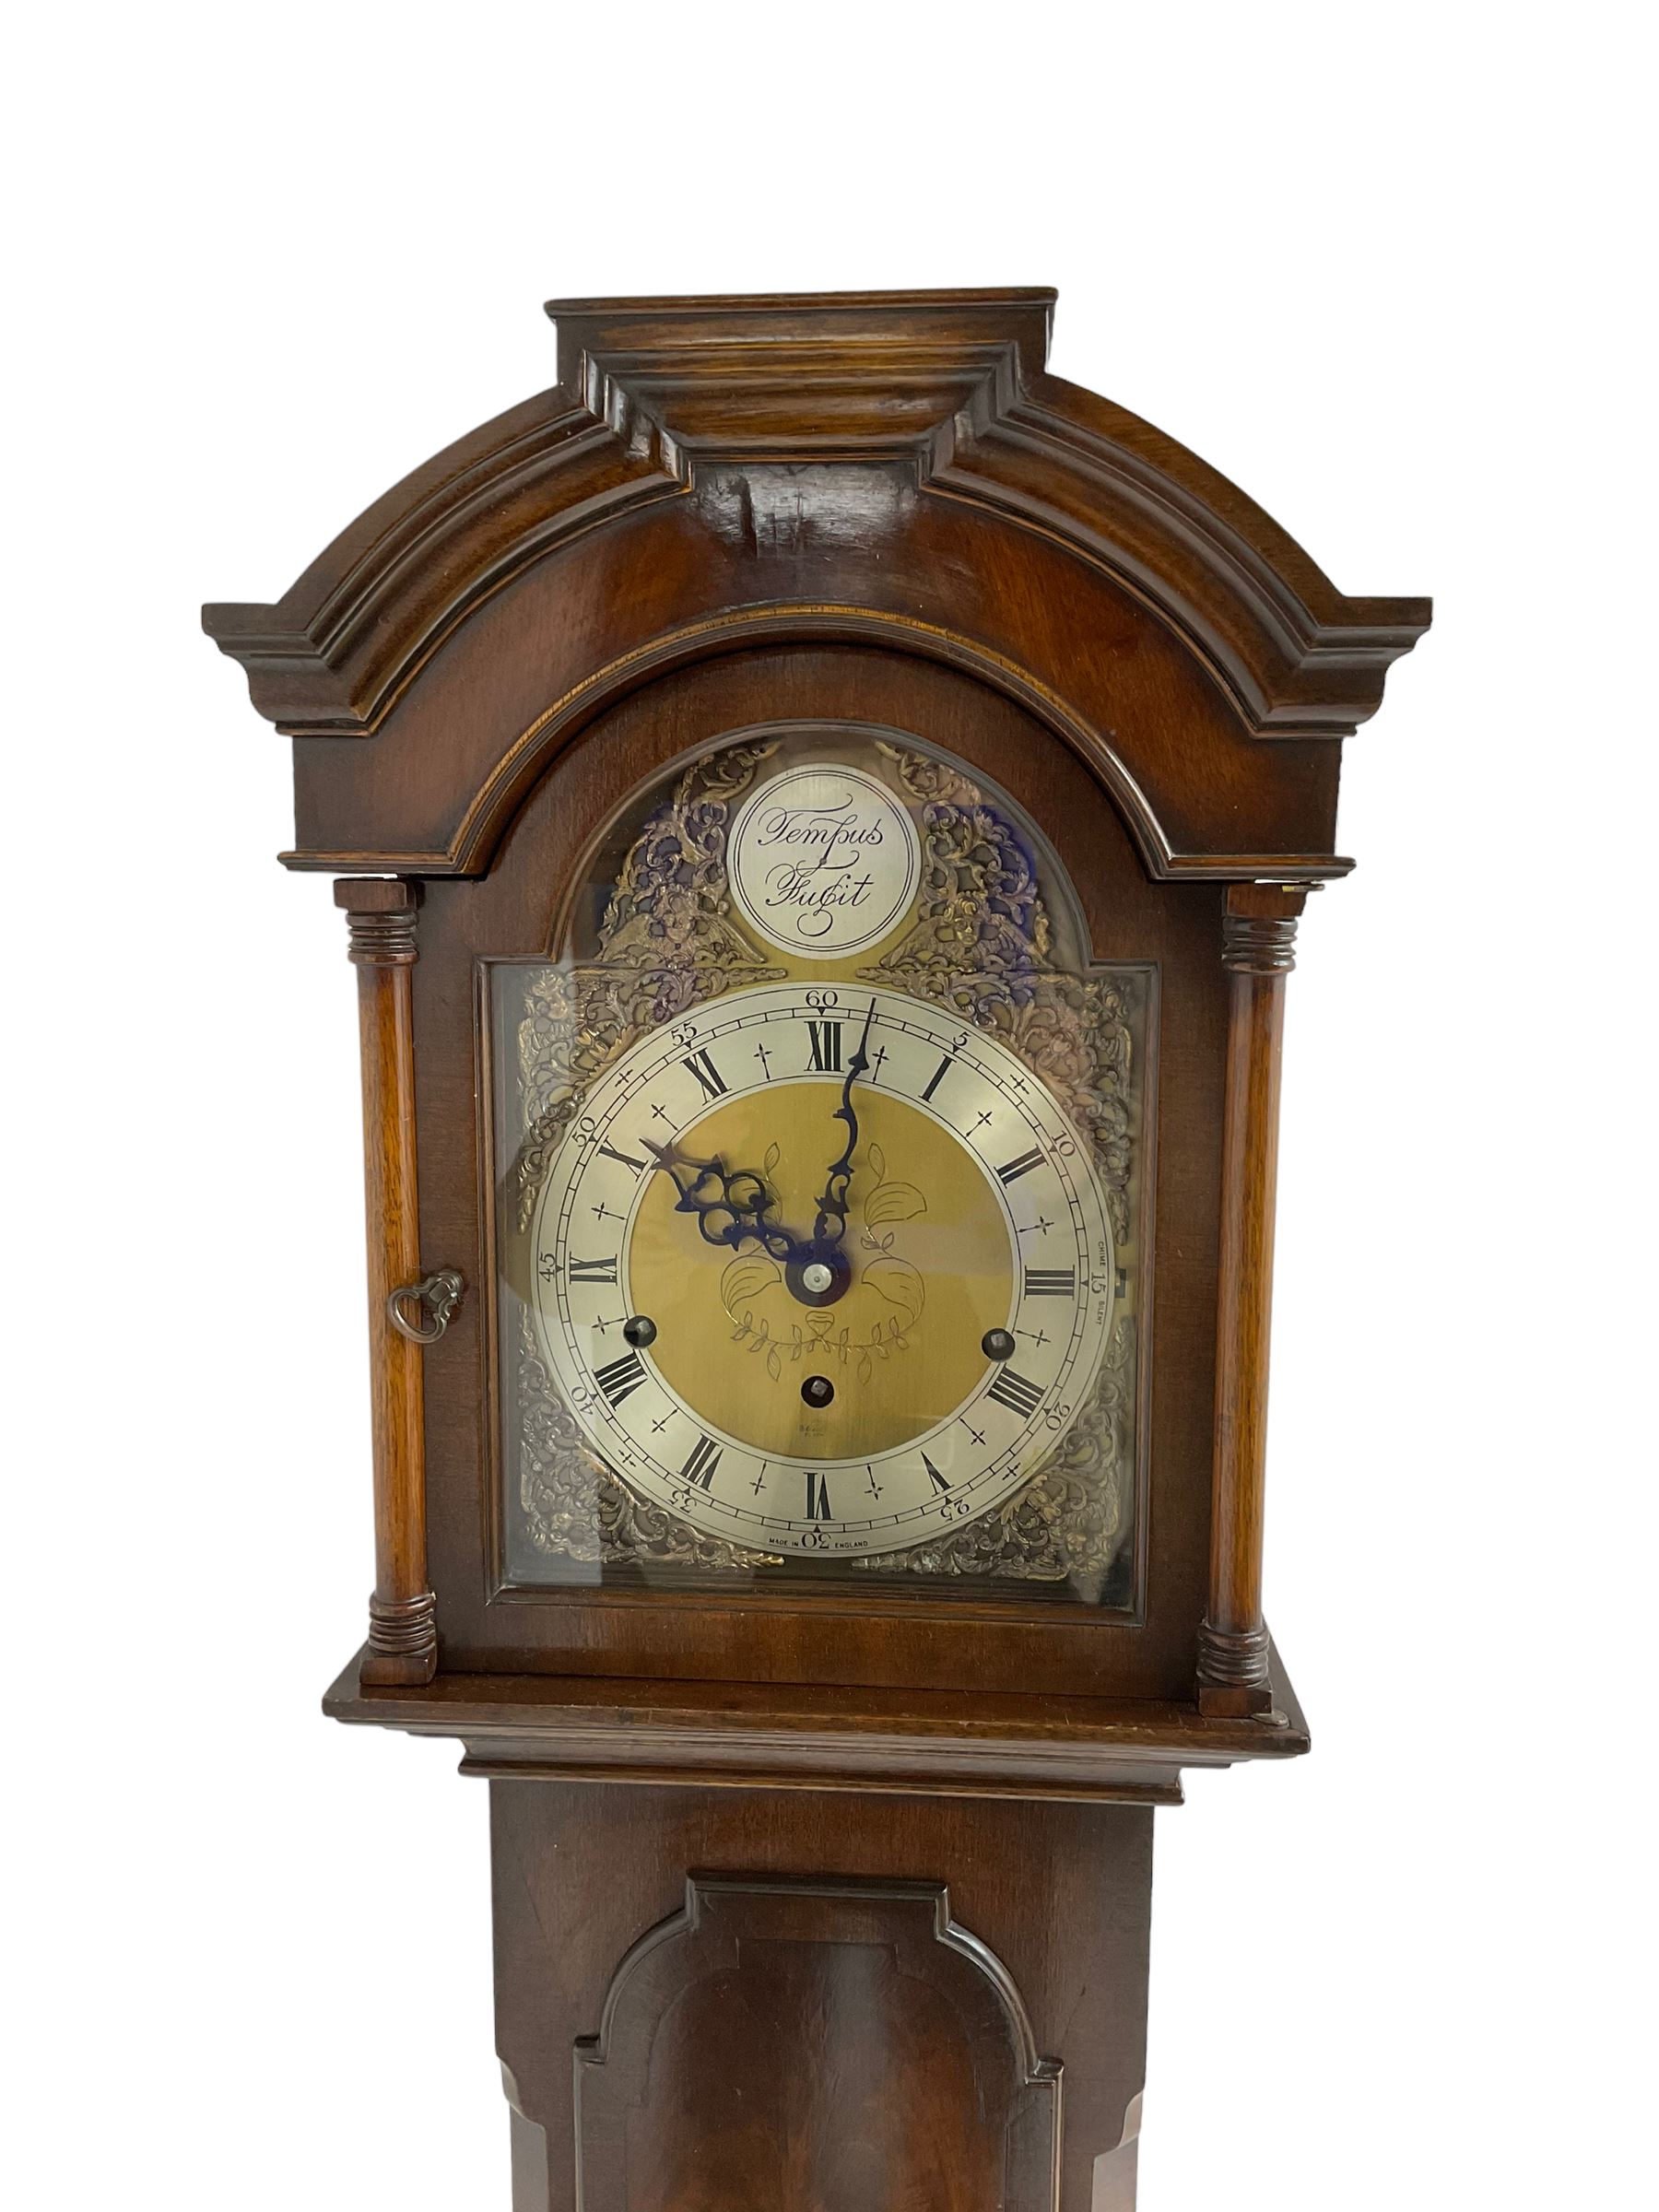 20th century Westminster chiming Grandmother clock - Mahogany case with a three train Elliot movemen - Image 3 of 4